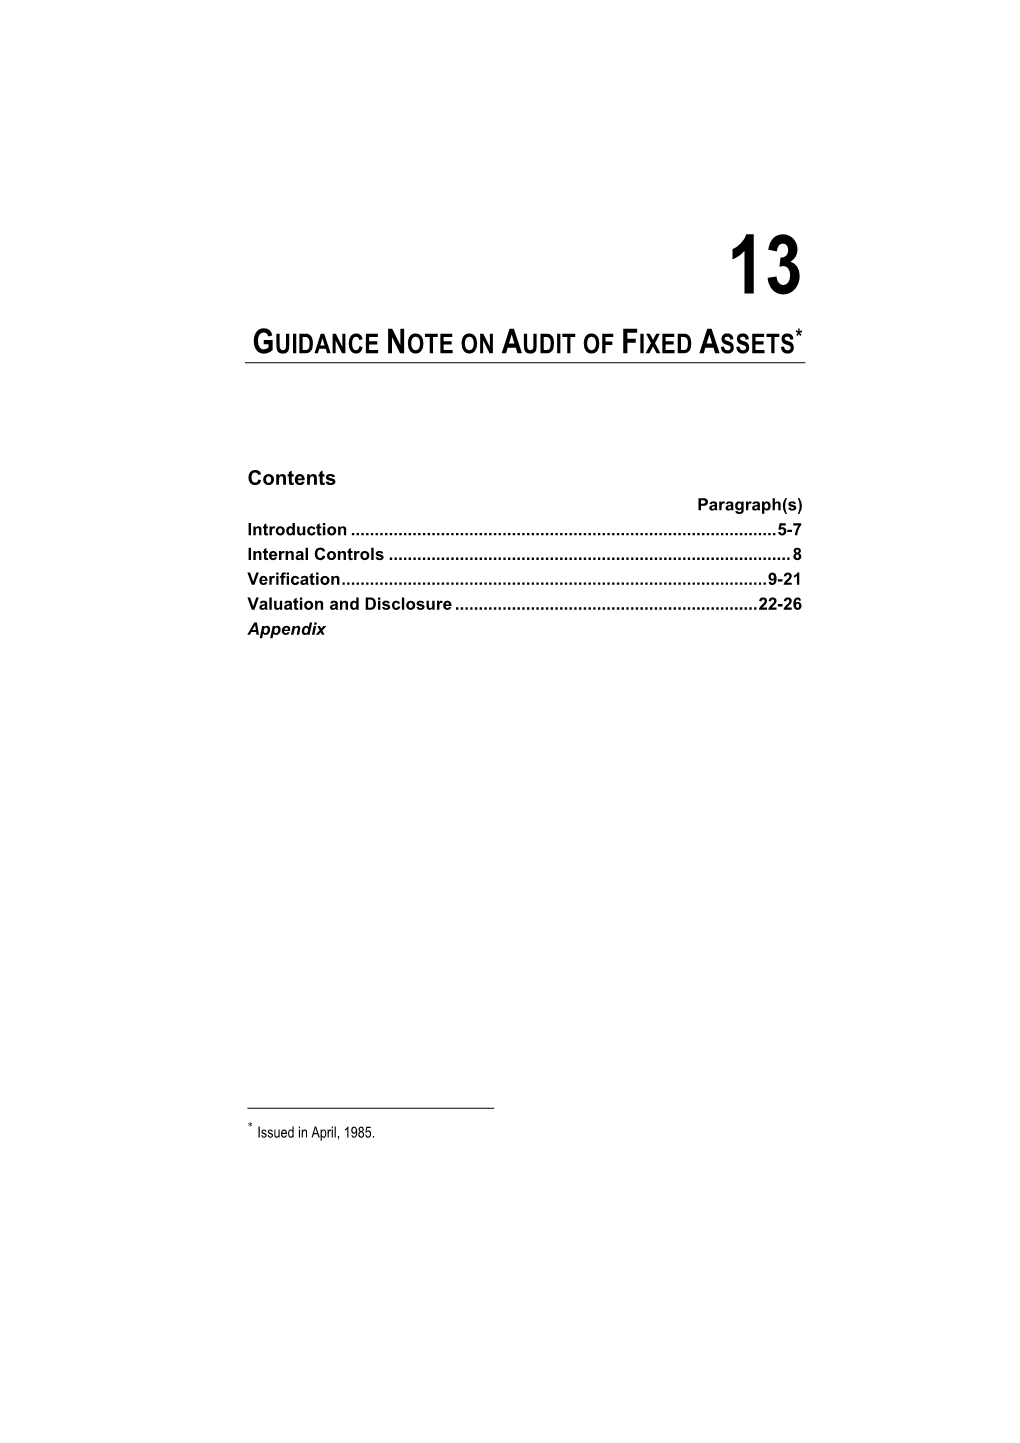 Guidance Note on Audit of Fixed Assets*